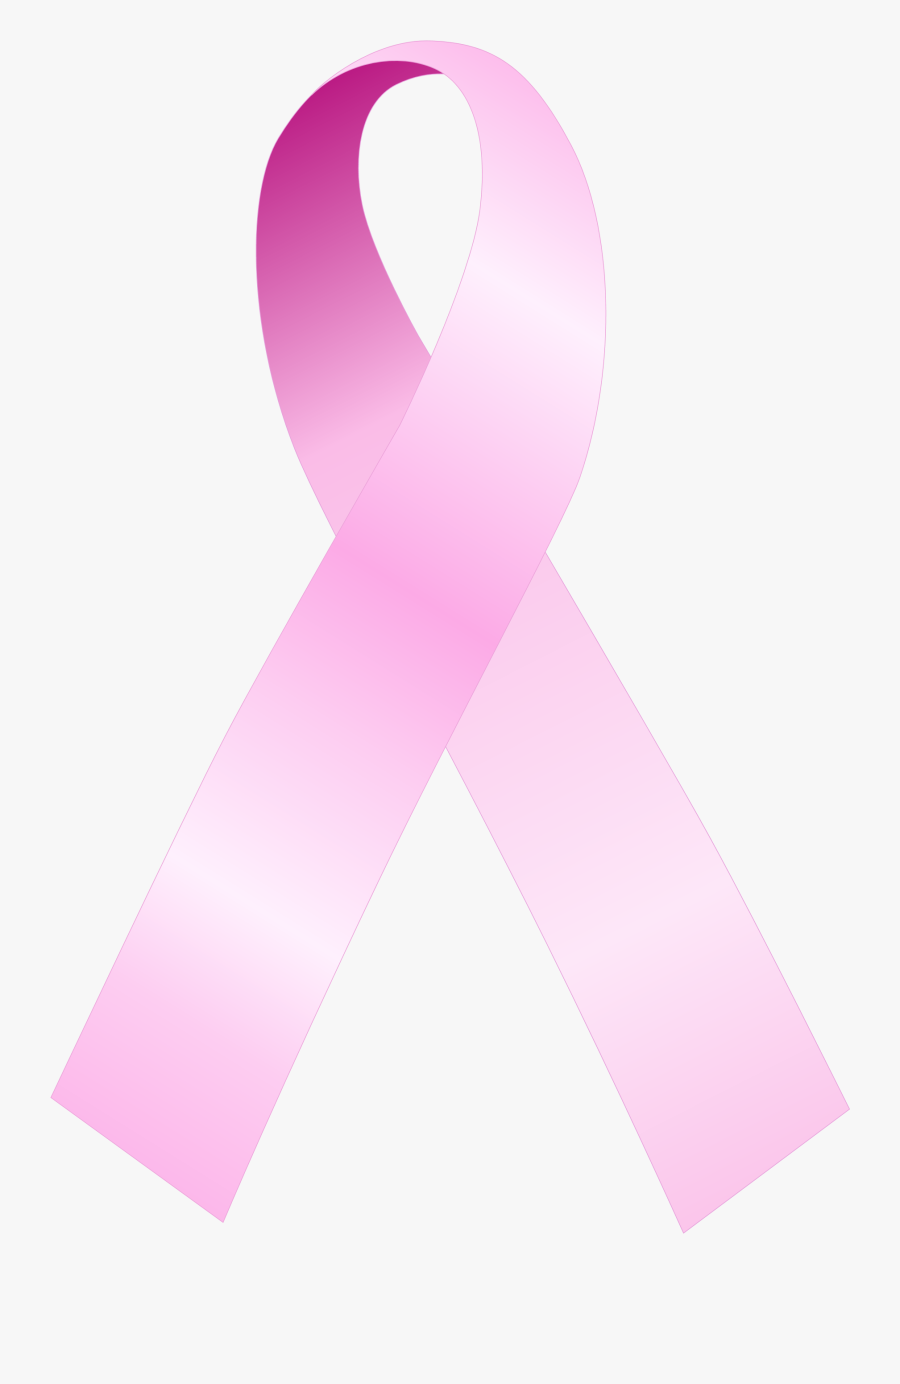 Breast Cancer Awareness Ribbons Clipart Download - Breast Cancer Awareness Ribbon Black Background, Transparent Clipart